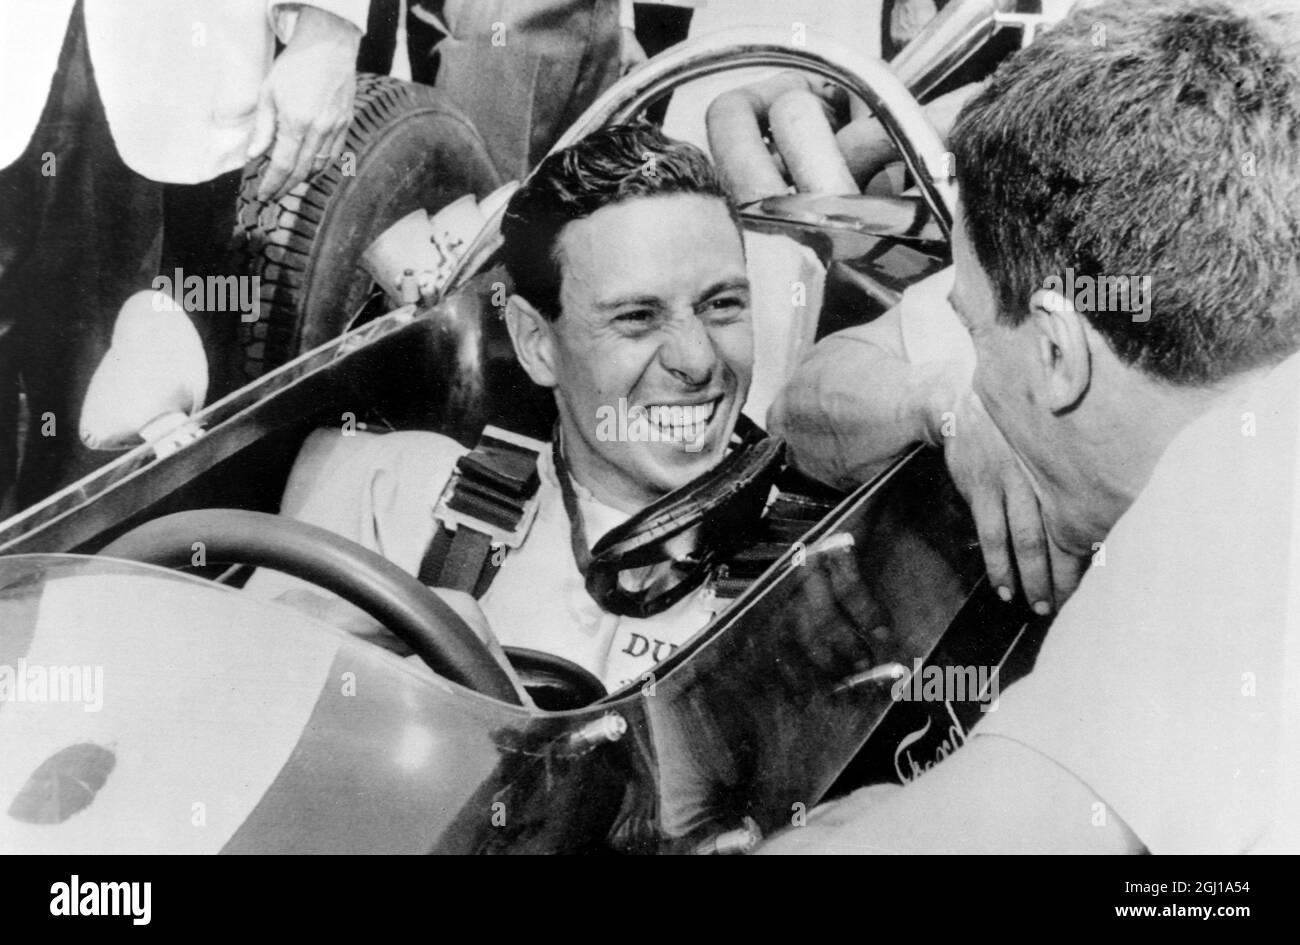 18 MAY 1964 Another record for Jim Clark. Scotland's Jim Clark, world champion racing driver, flashes a happy grin here 16th of May on qualifying for the 500 mile race at an average four lap speed of hundred 158.828 mph. Clark's speed setting new Indianapolis Speedway record. At the Mallory Park circuit, Leicestershire, yesterday, Clark, who had flown from America overnight, won the 200 lap Guards Trophy Race in a Lotus Ford, breaking the lap record for sports cars over 2000cc Indianapolis, Indiana, USA Stock Photo